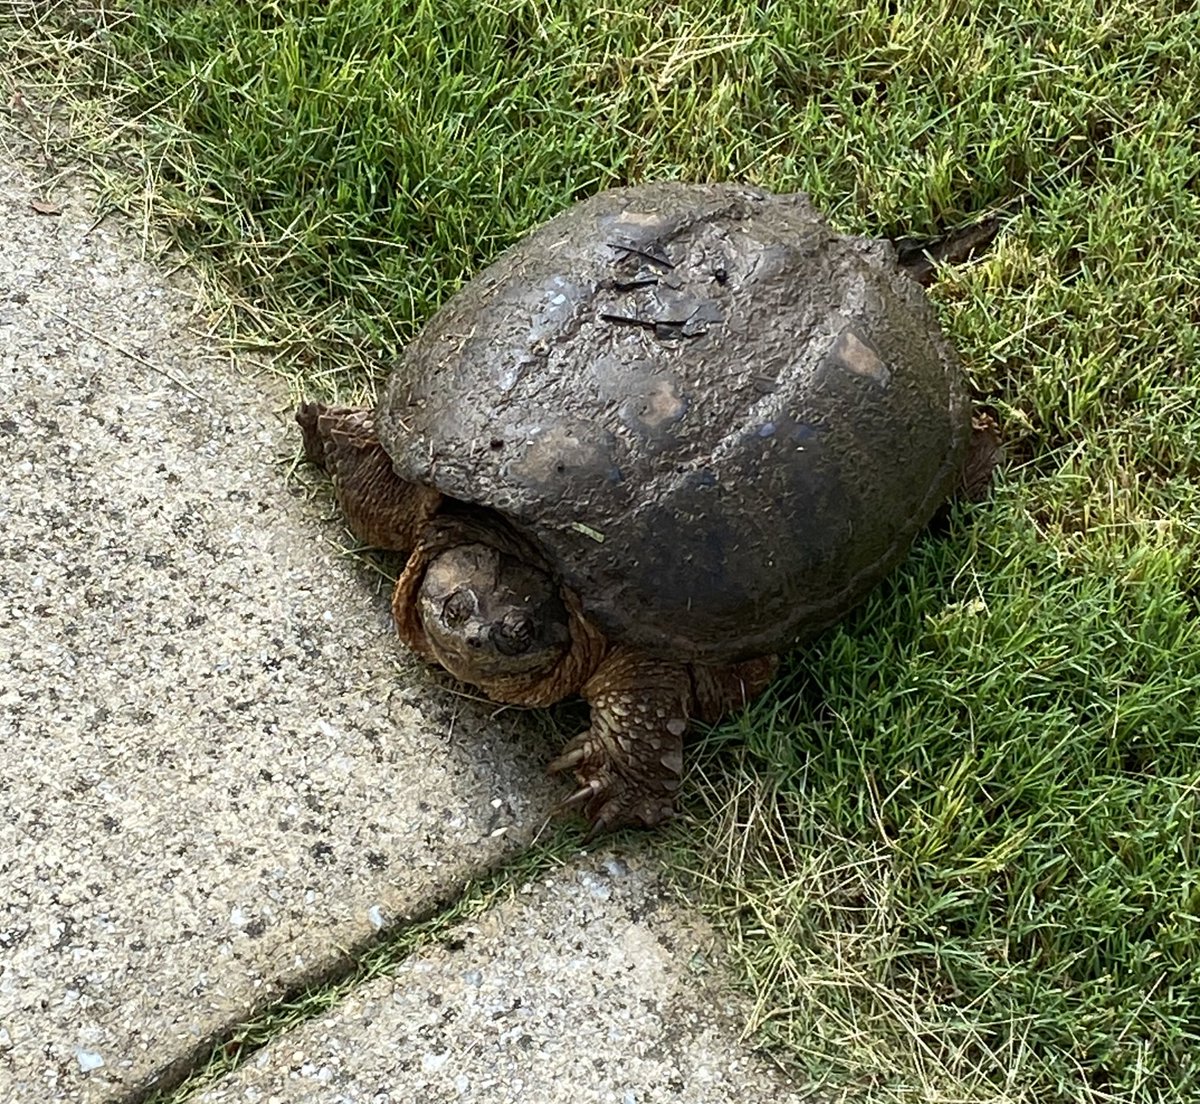 good morning twt i just ran into a SNAPPING TURTLE ON THE SIDEWALK??